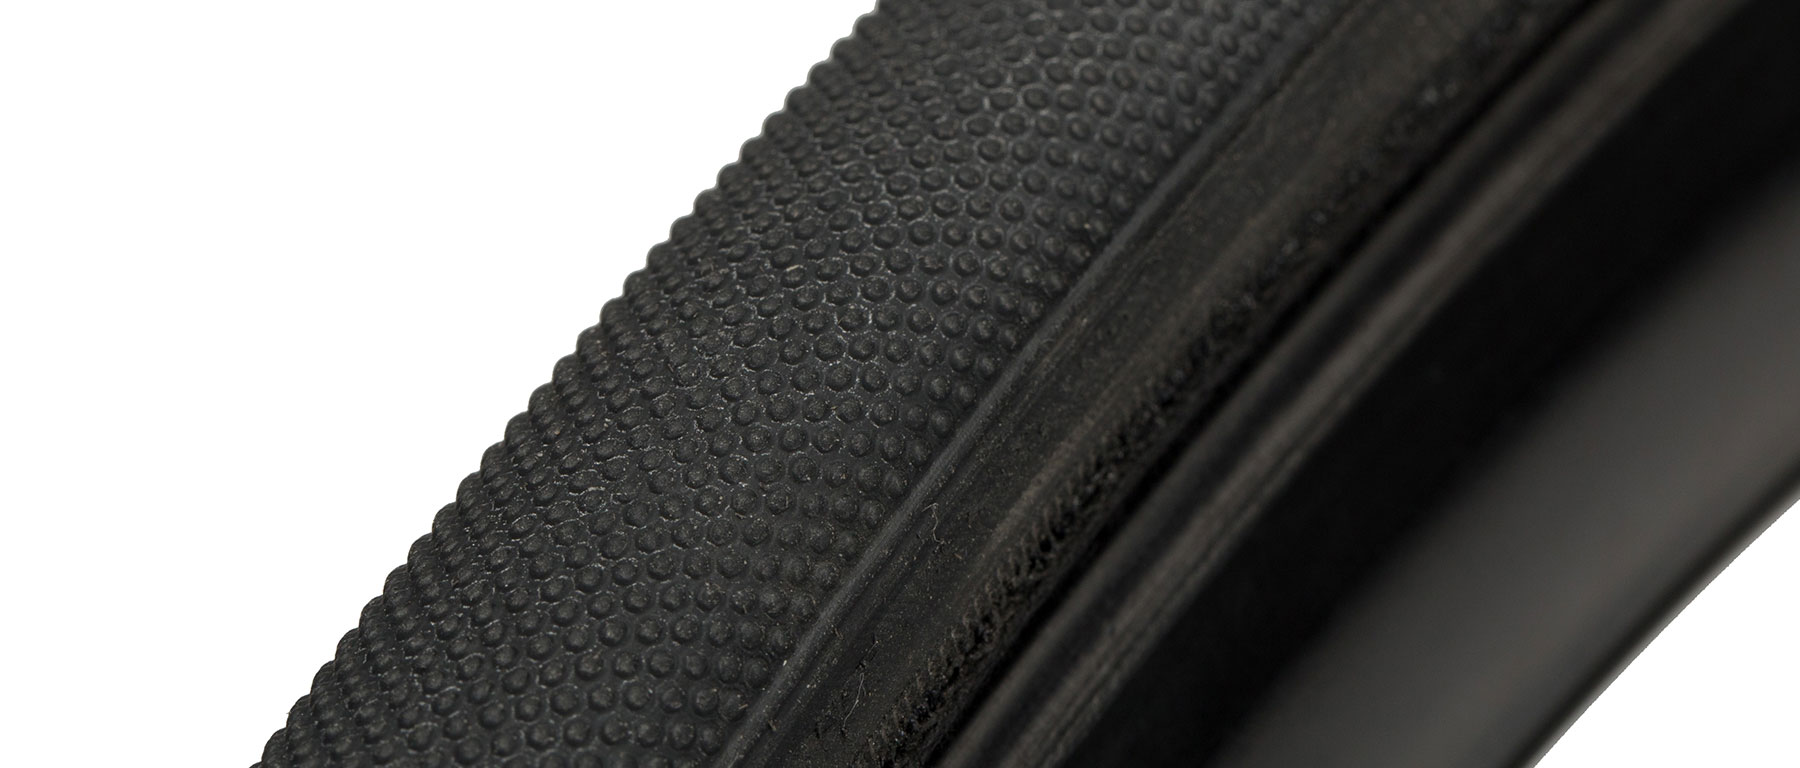 Continental Competition Tubular Road Tire